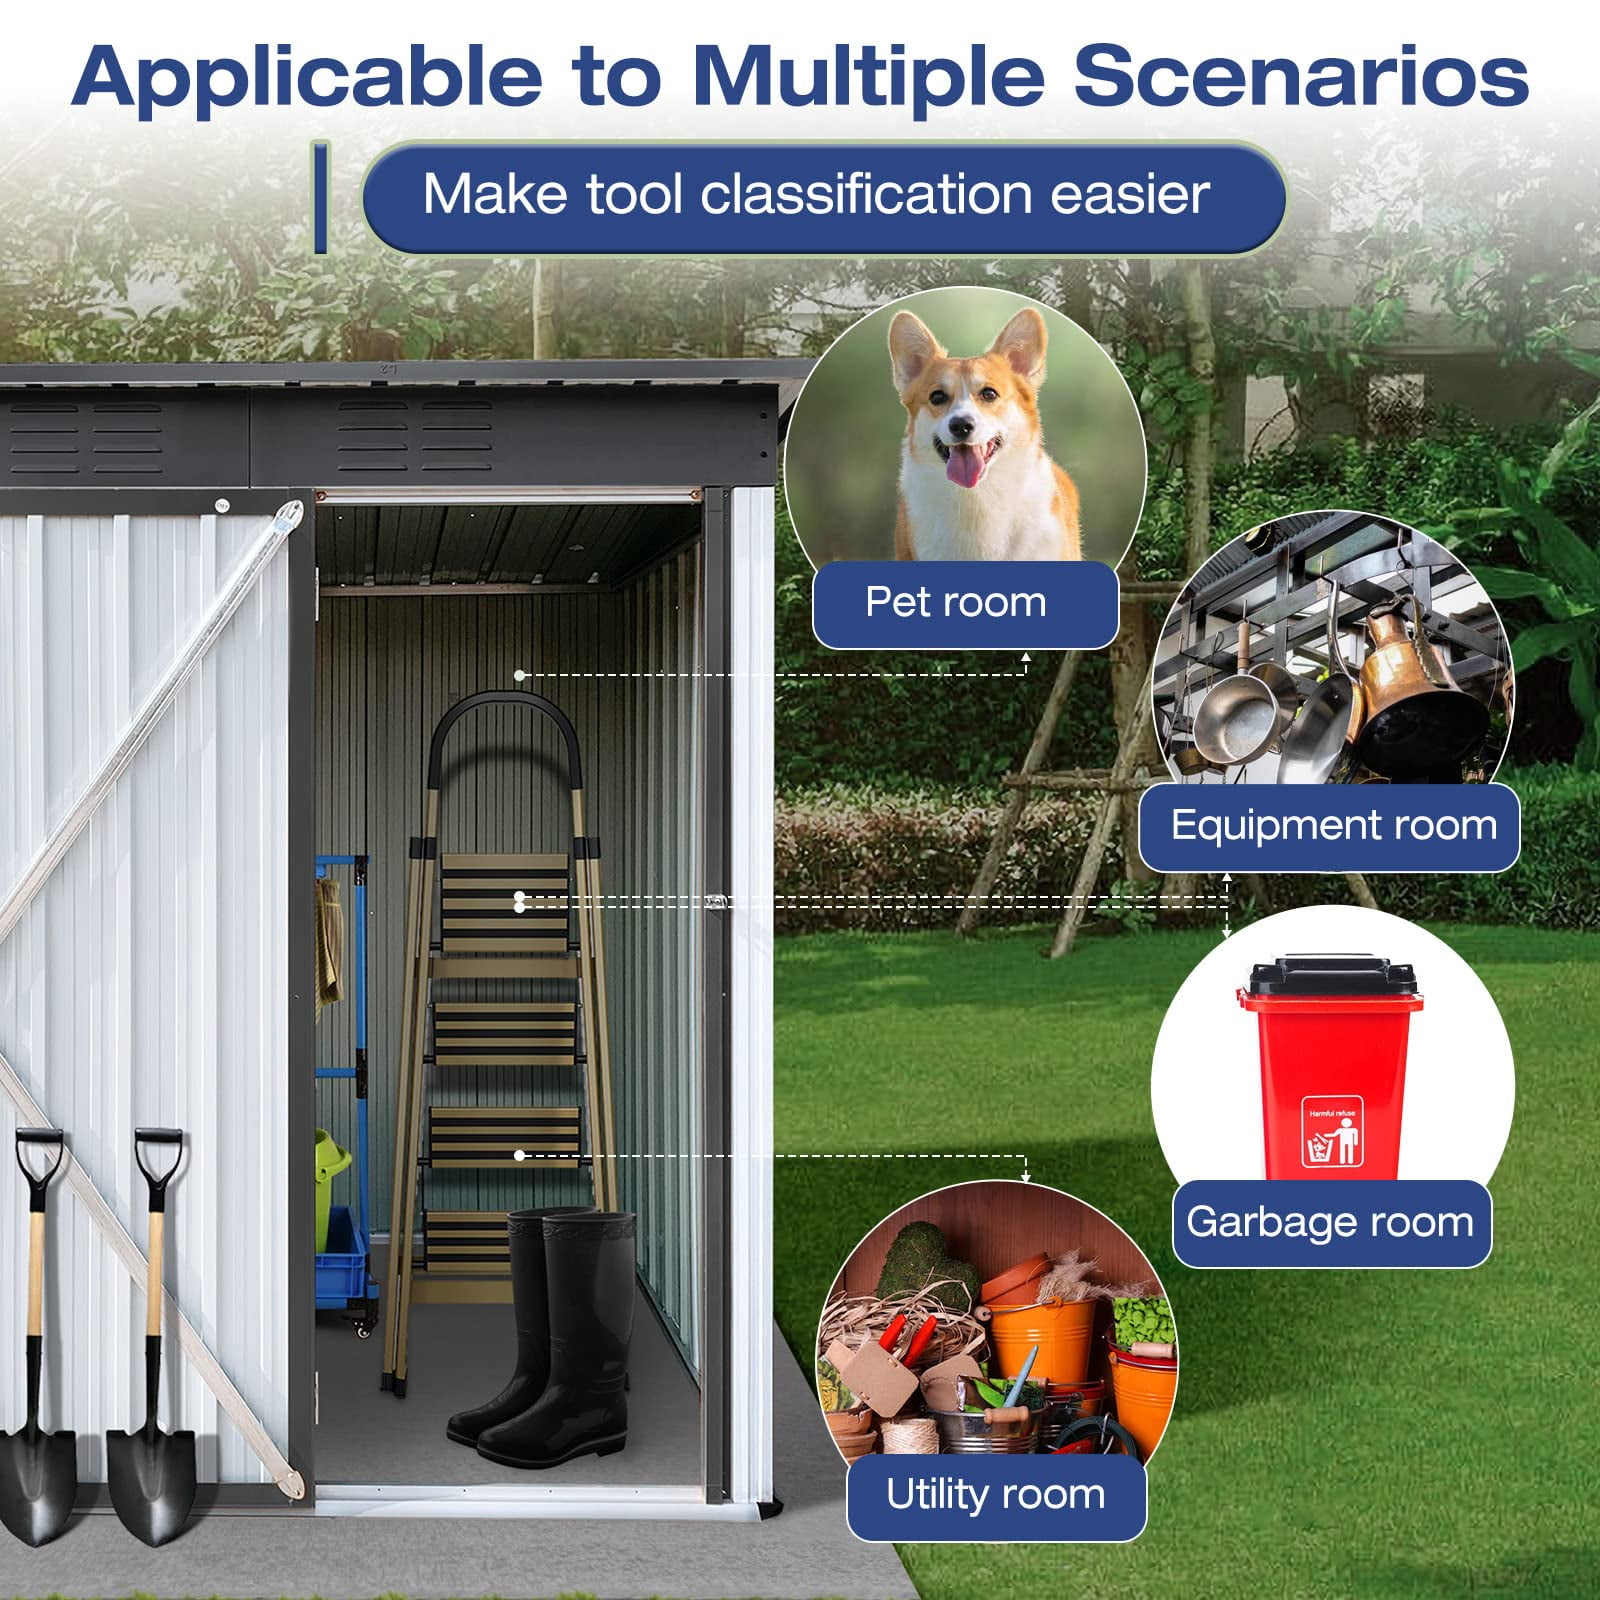 5.3' x 4.6' Outdoor Storage Shed, SYNGAR Wood Vertical Storage Organizer  with Shelves and Lockable Doors, Tools Storage Cabinet with Waterproof